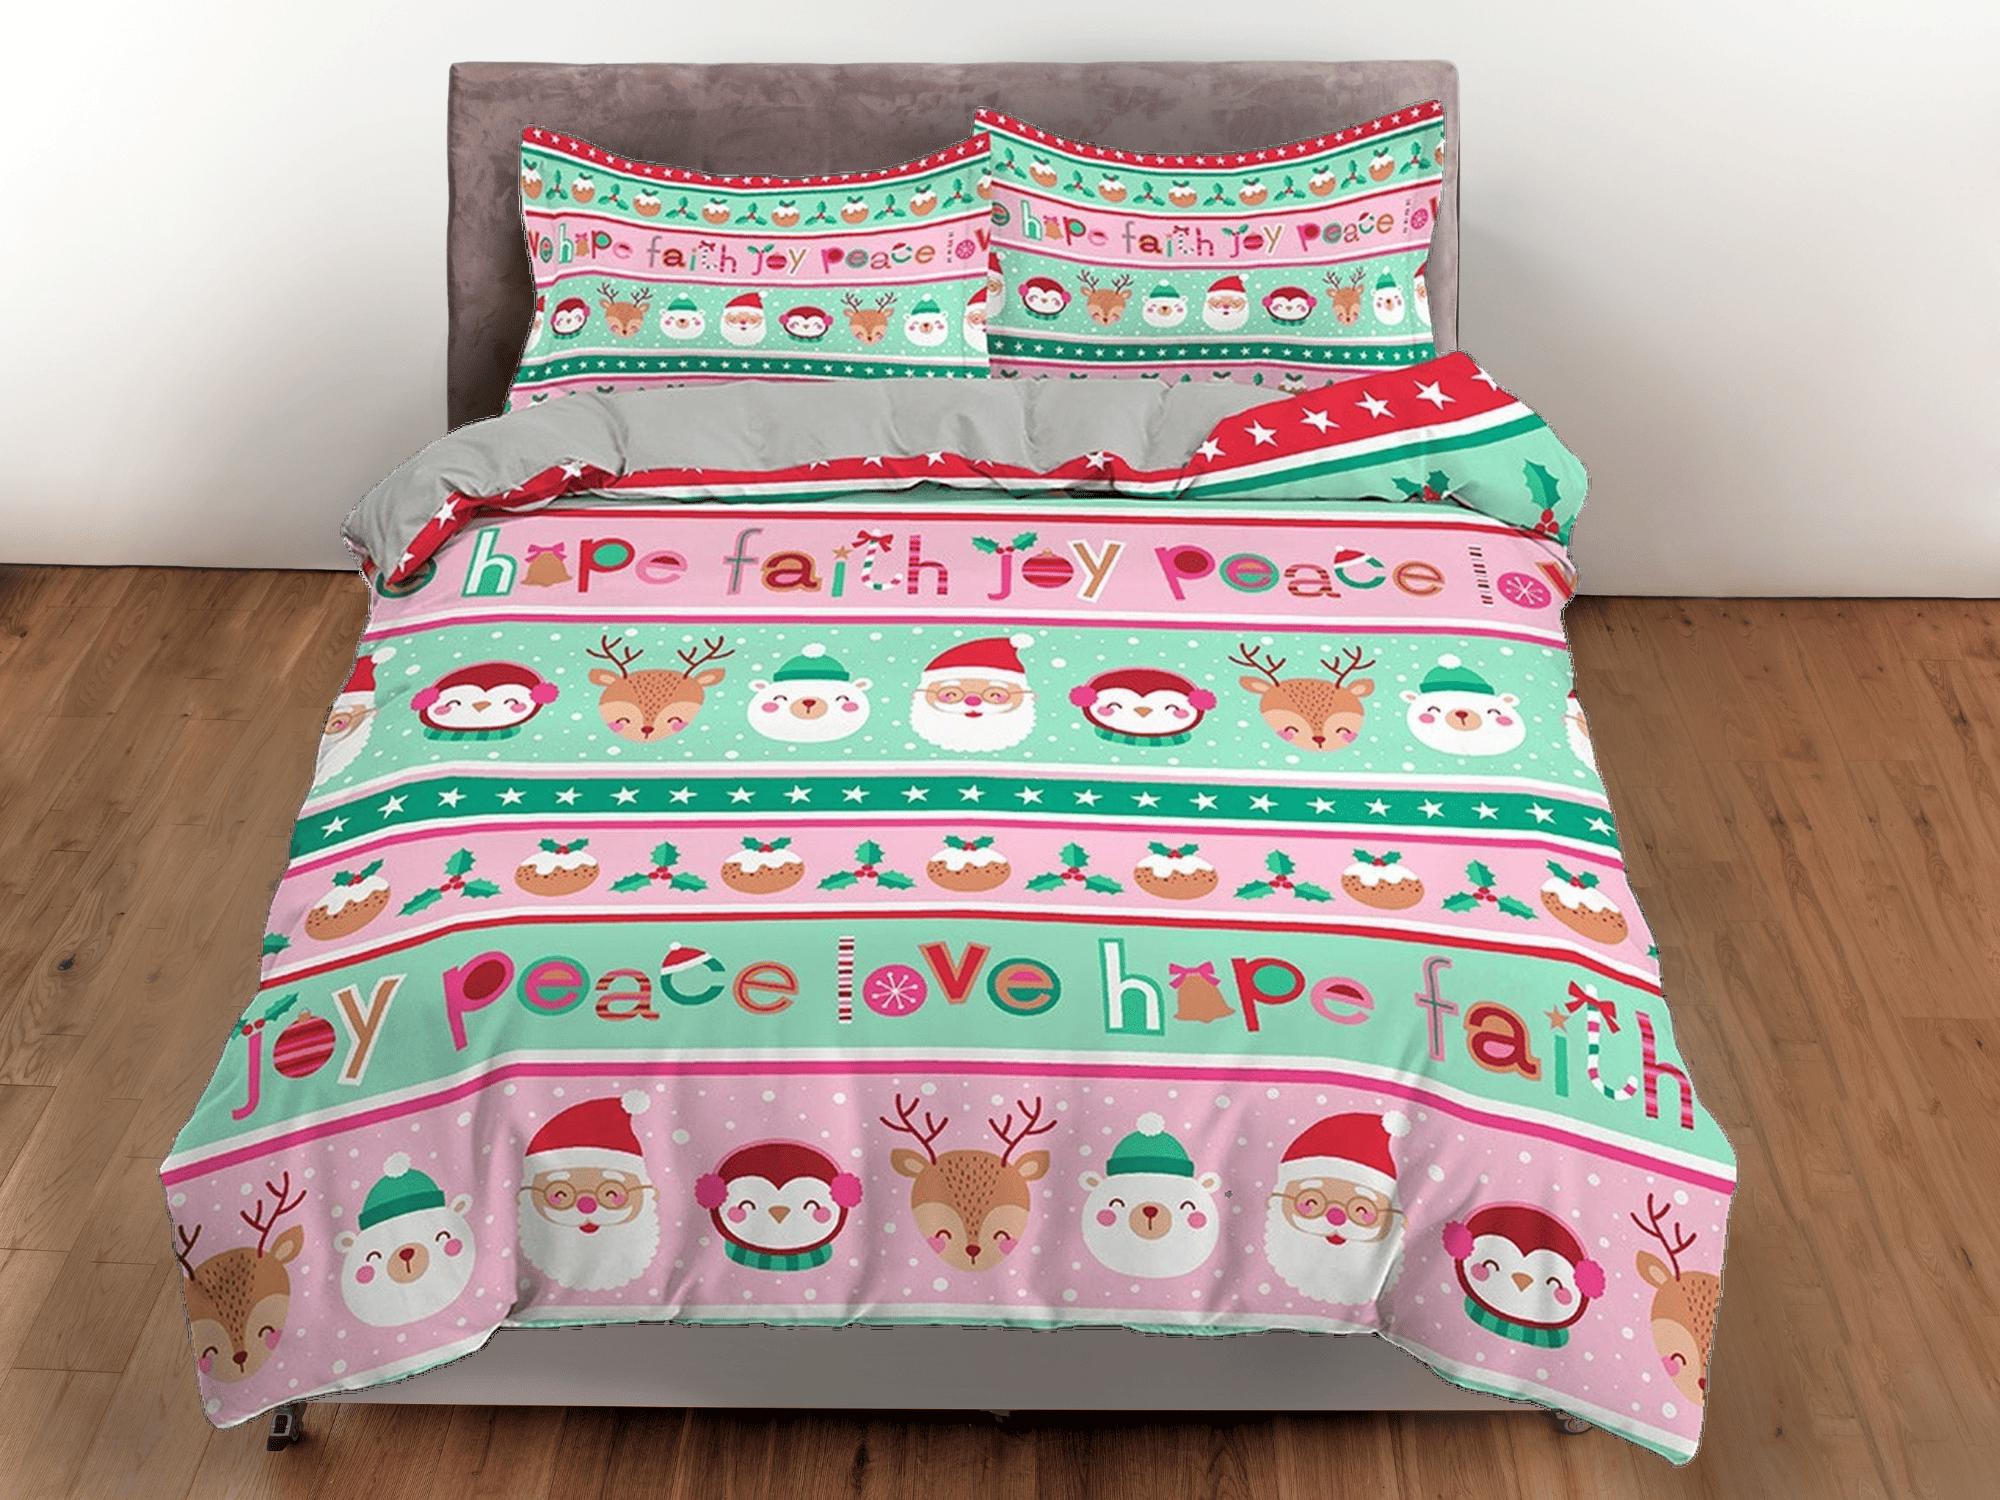 daintyduvet Colorful pink and green santa claus duvet cover set christmas full size bedding & pillowcase, college bedding, toddler bedding, holiday gift